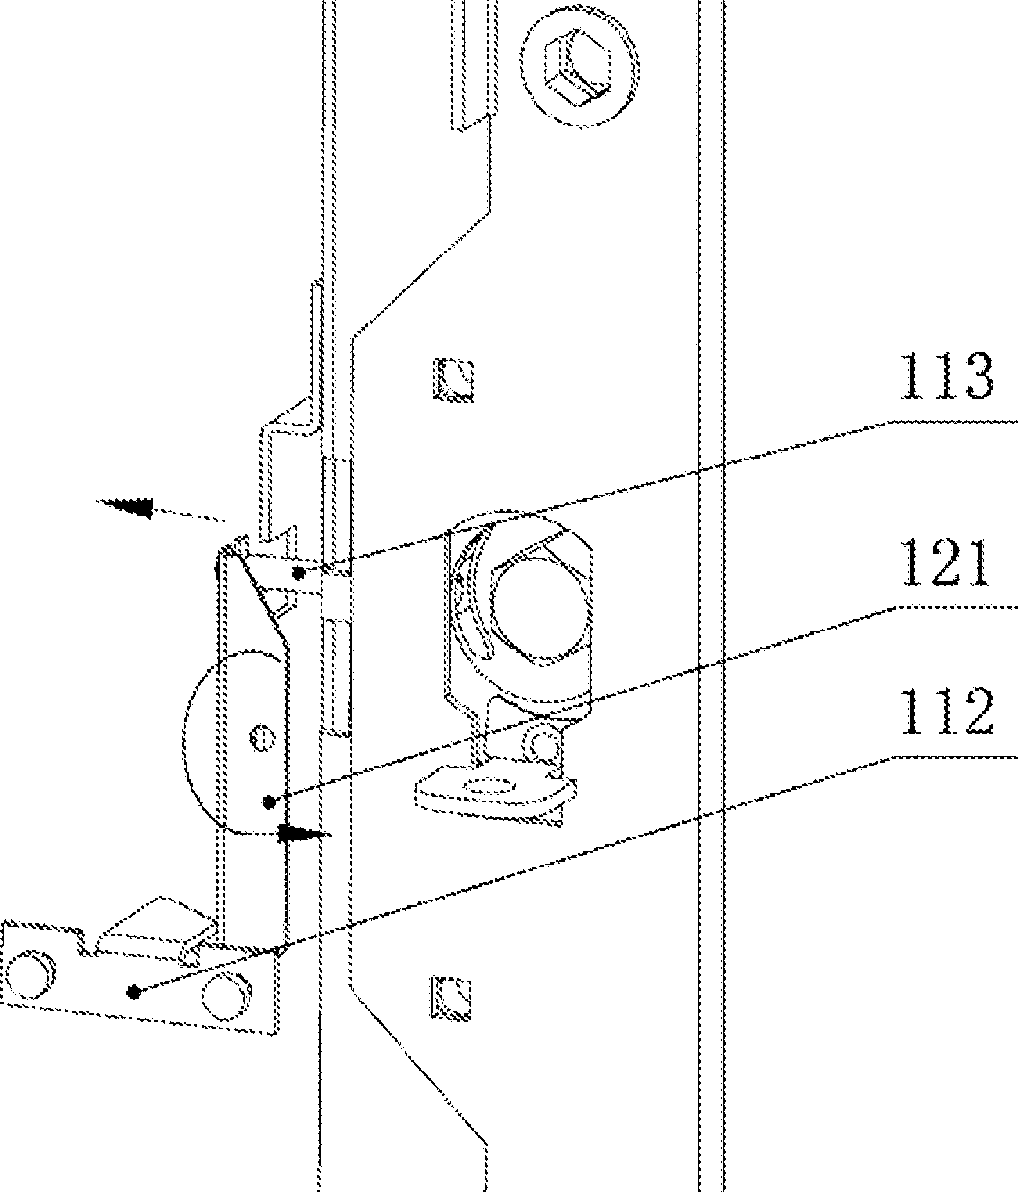 Mechanical Interlock Device Among Cable Door, Rear Door And Earthing Switch